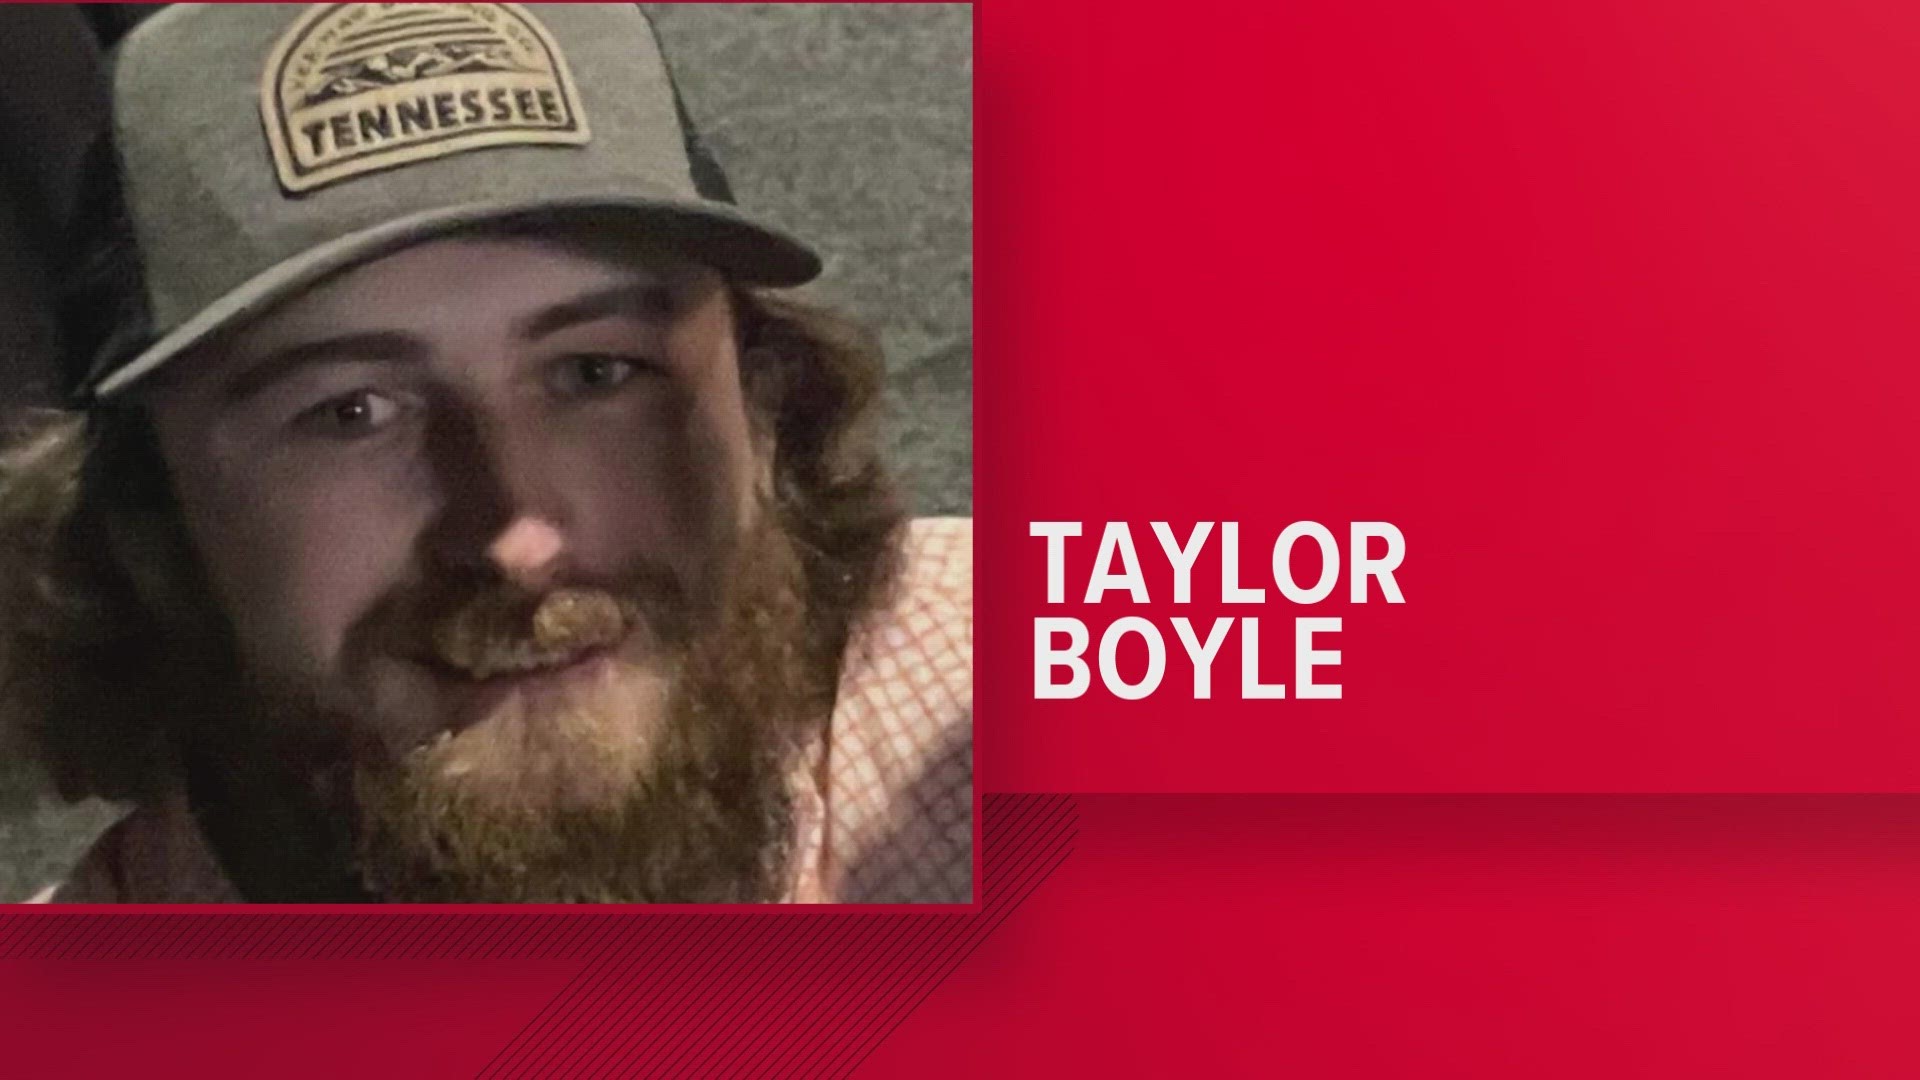 The Knox County Sheriff's Office said Taylor Boyle had last been spoken to on Sunday, Oct. 15 at around 10 a.m.